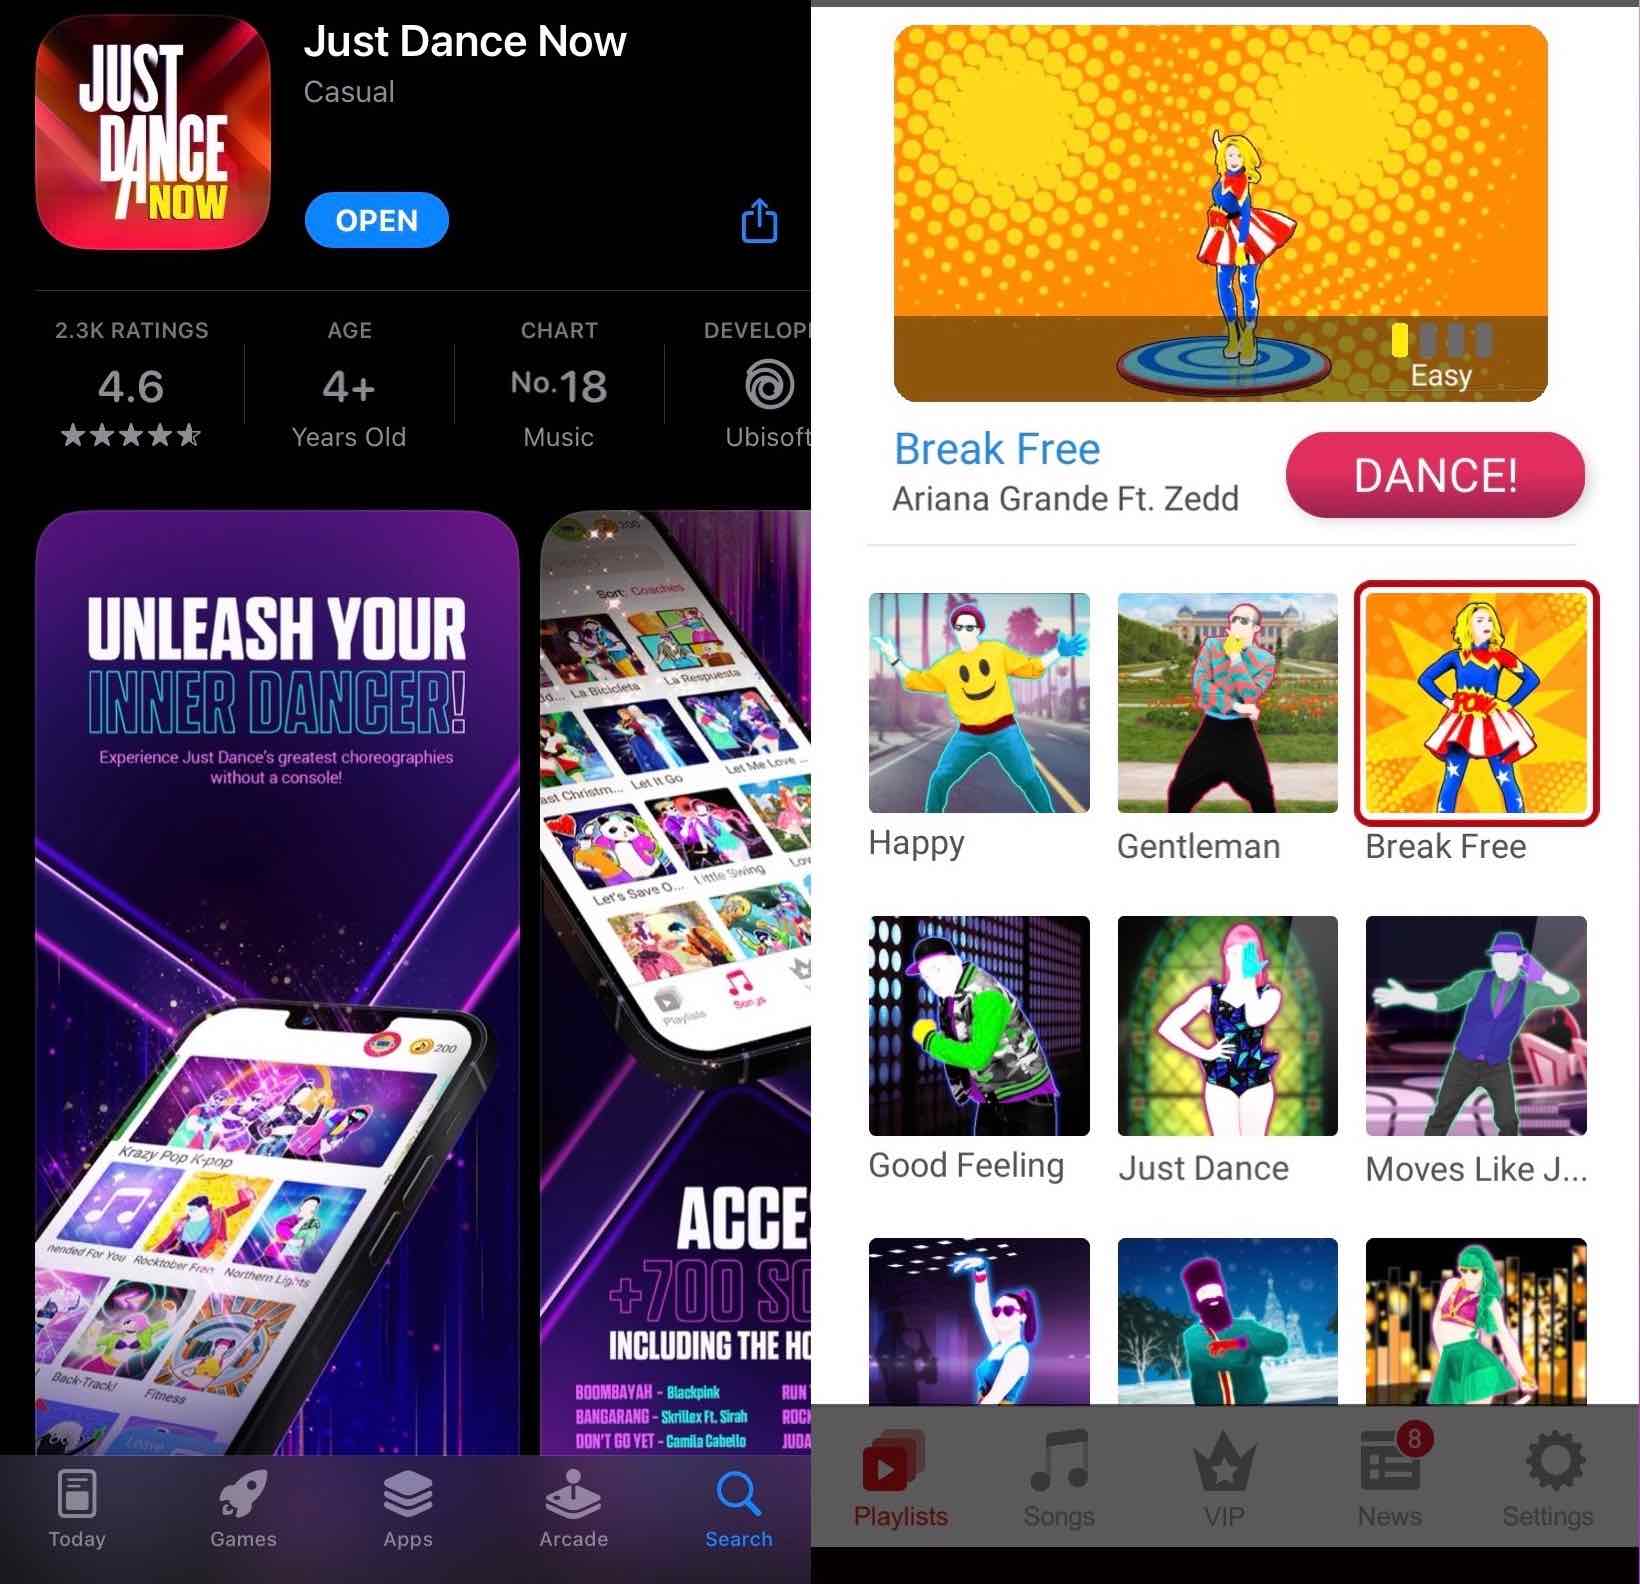 Just Dance Now game on the iPhone